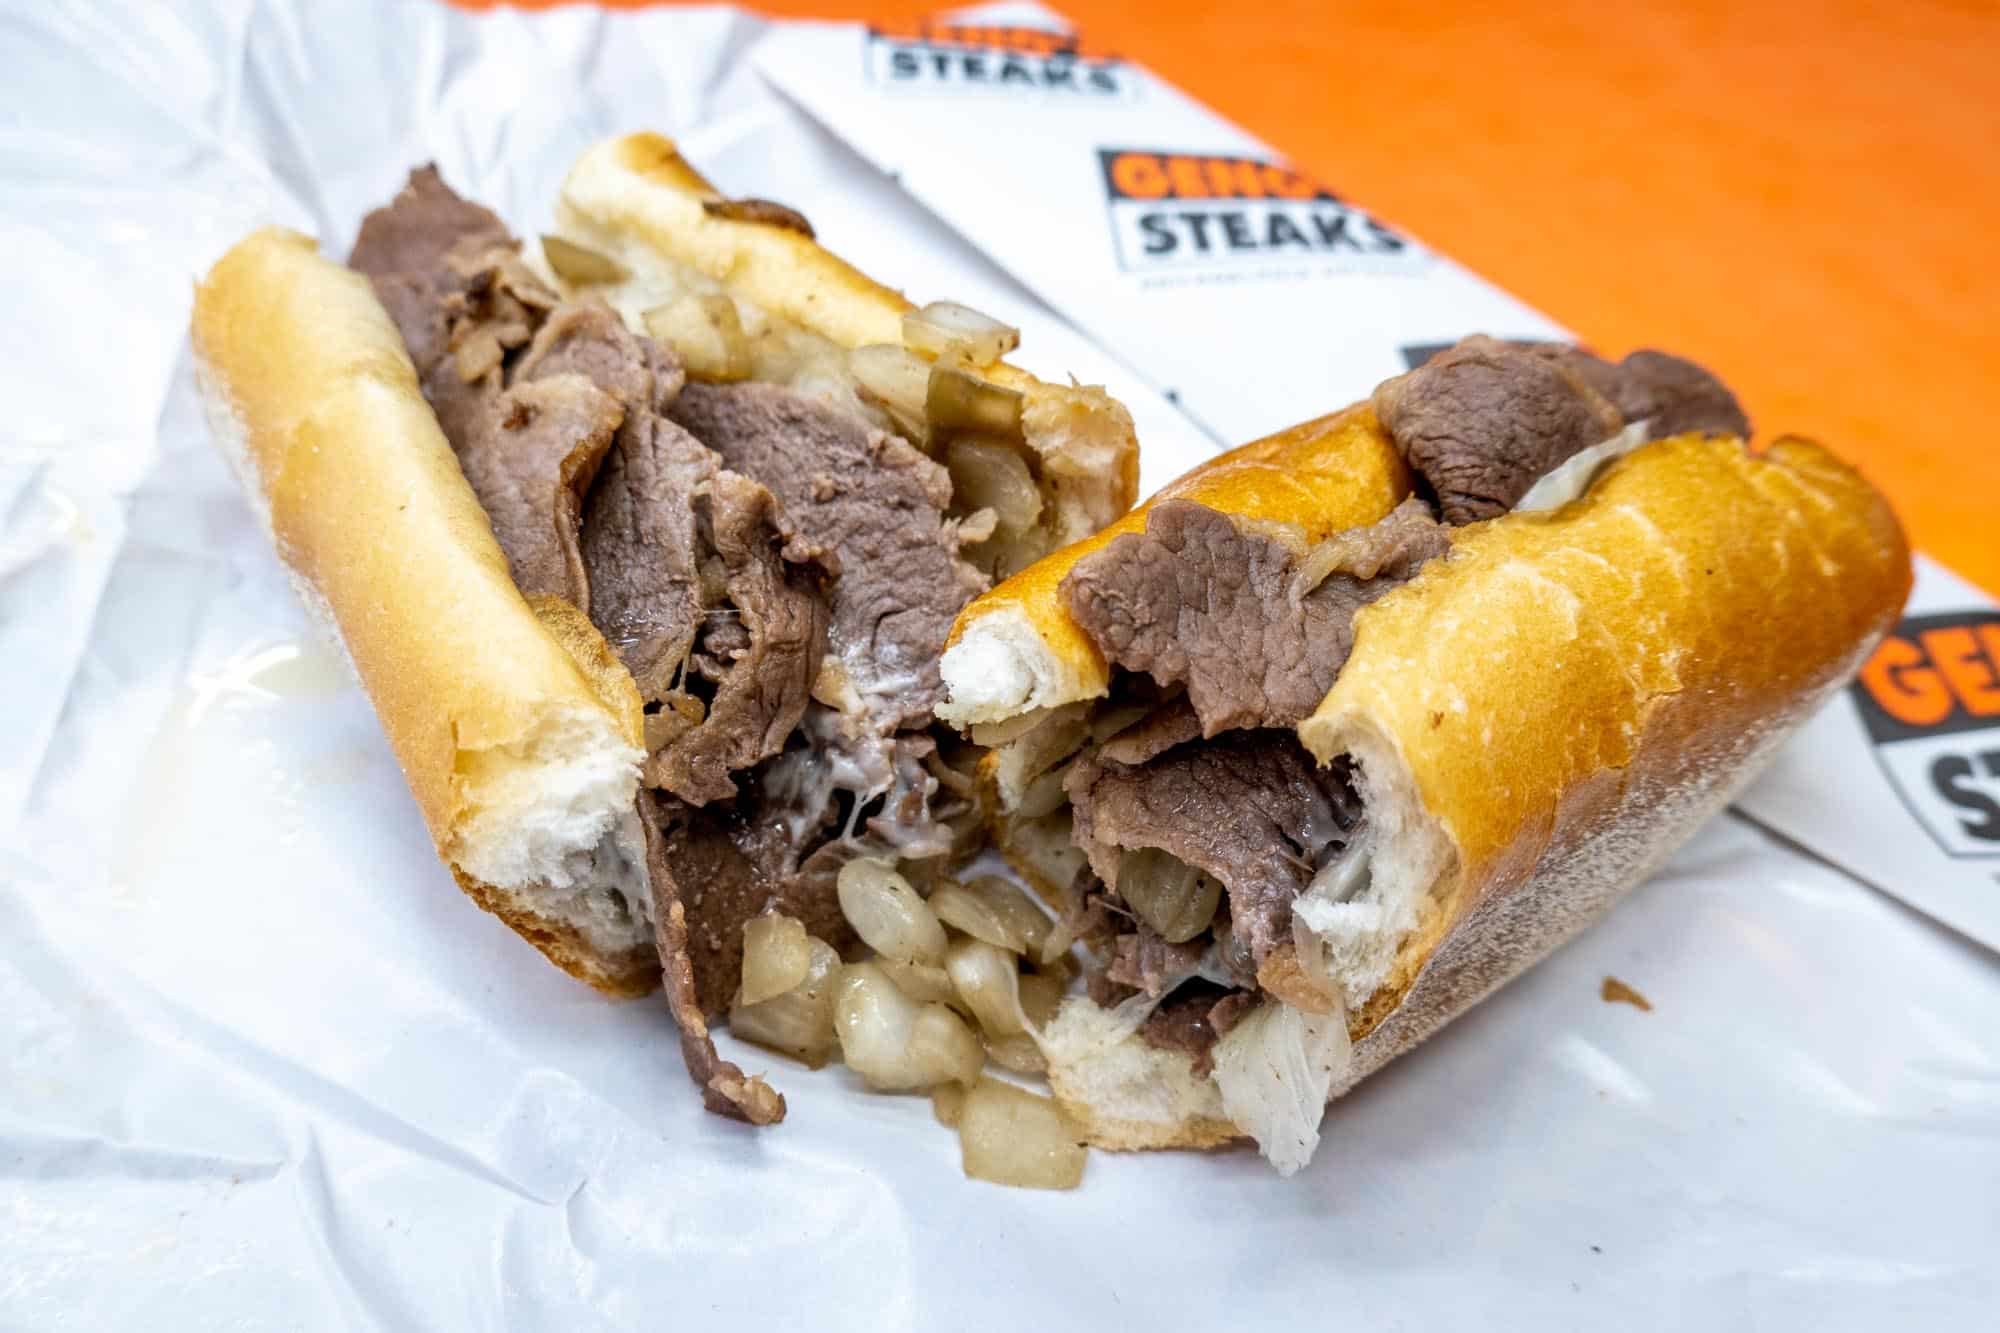 Cheesesteak cut in half on paper wrapper from Geno's Steaks